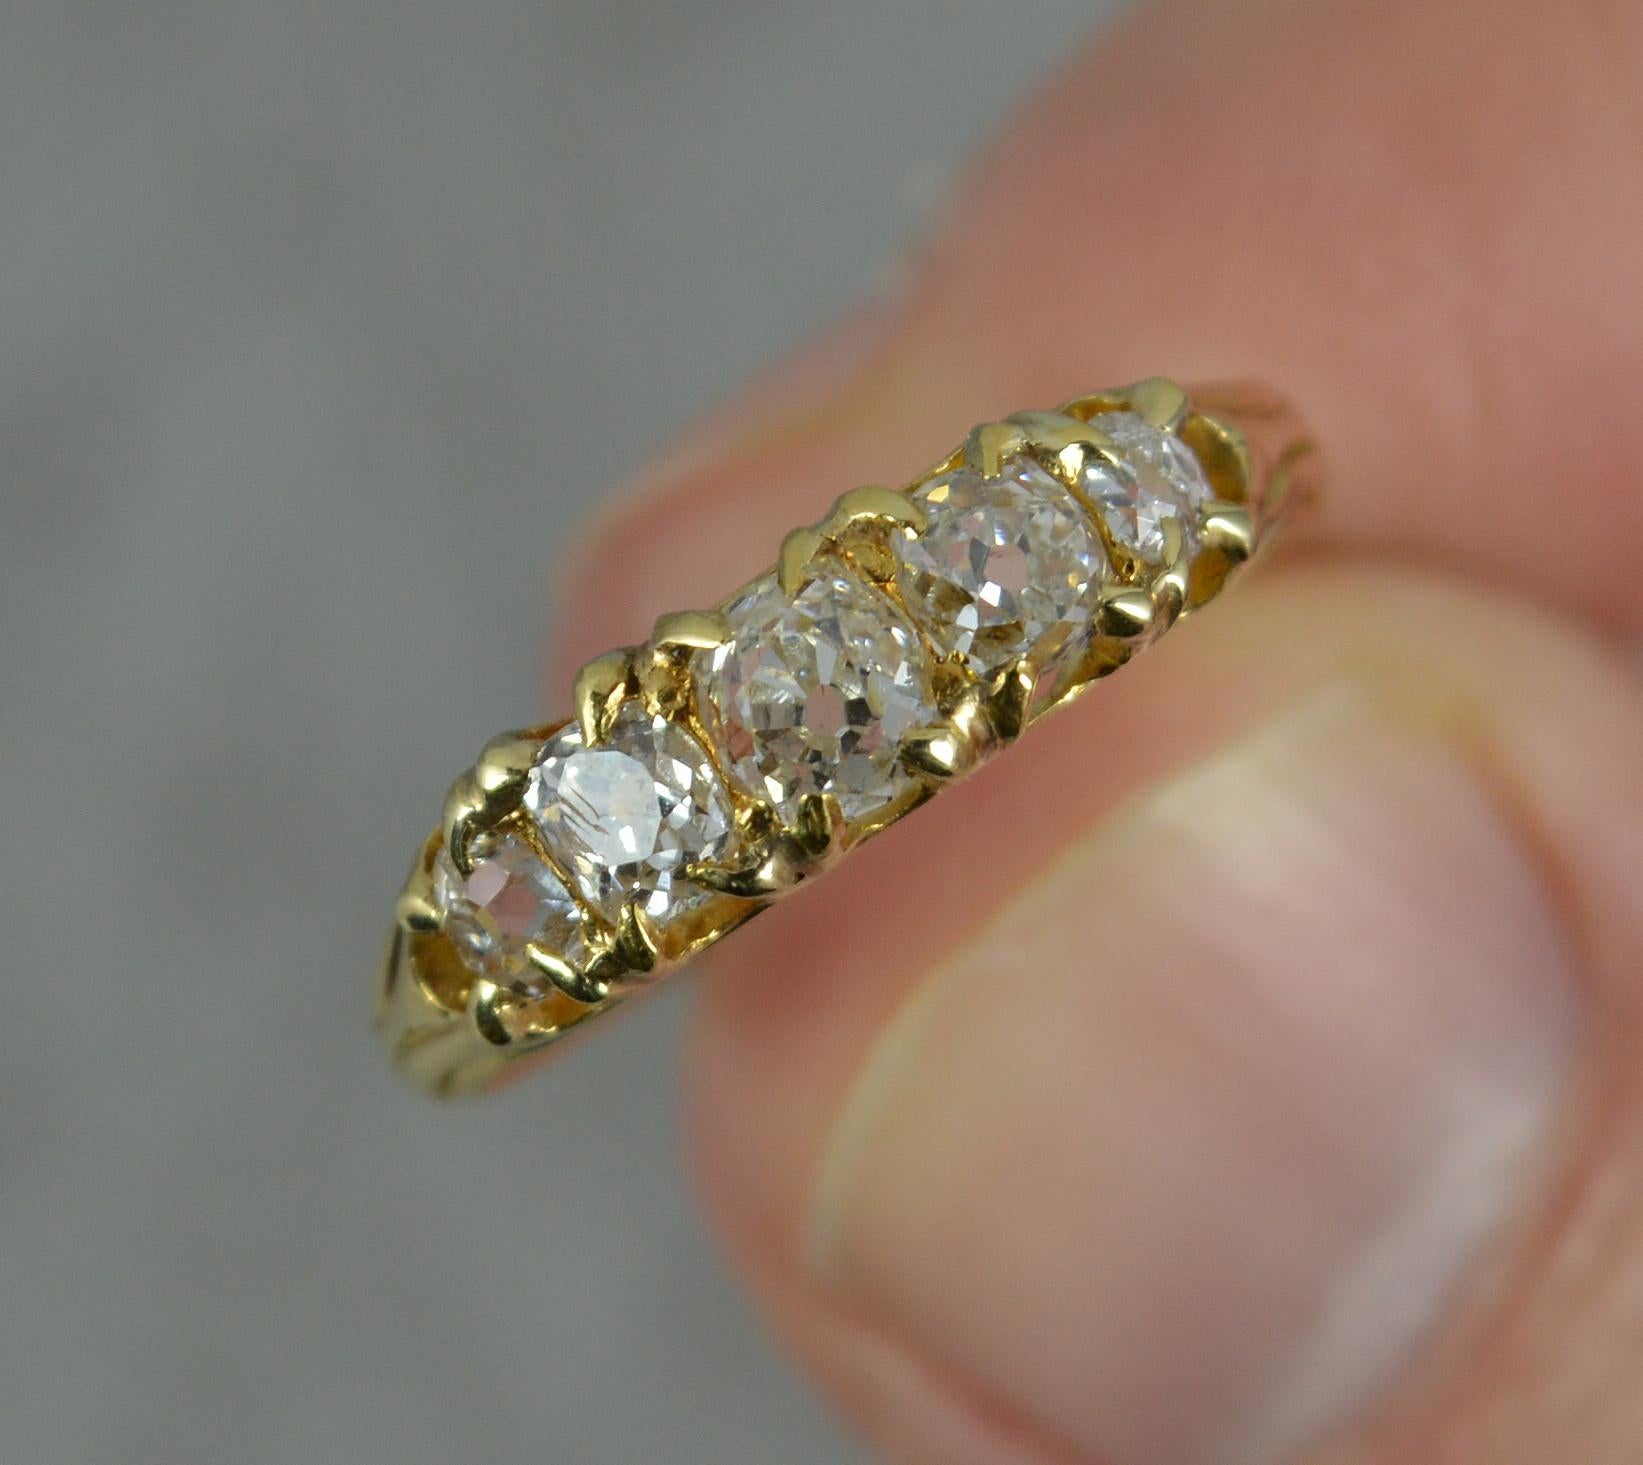 A stunning 18 carat gold and diamond five stone ring. c1890.
18 carat yellow gold example.
Designed with five natural old cut diamonds to total 0.75-0.8 carats approx. Graduated size. Clean diamonds, white and sparkly. All matching, very deep old